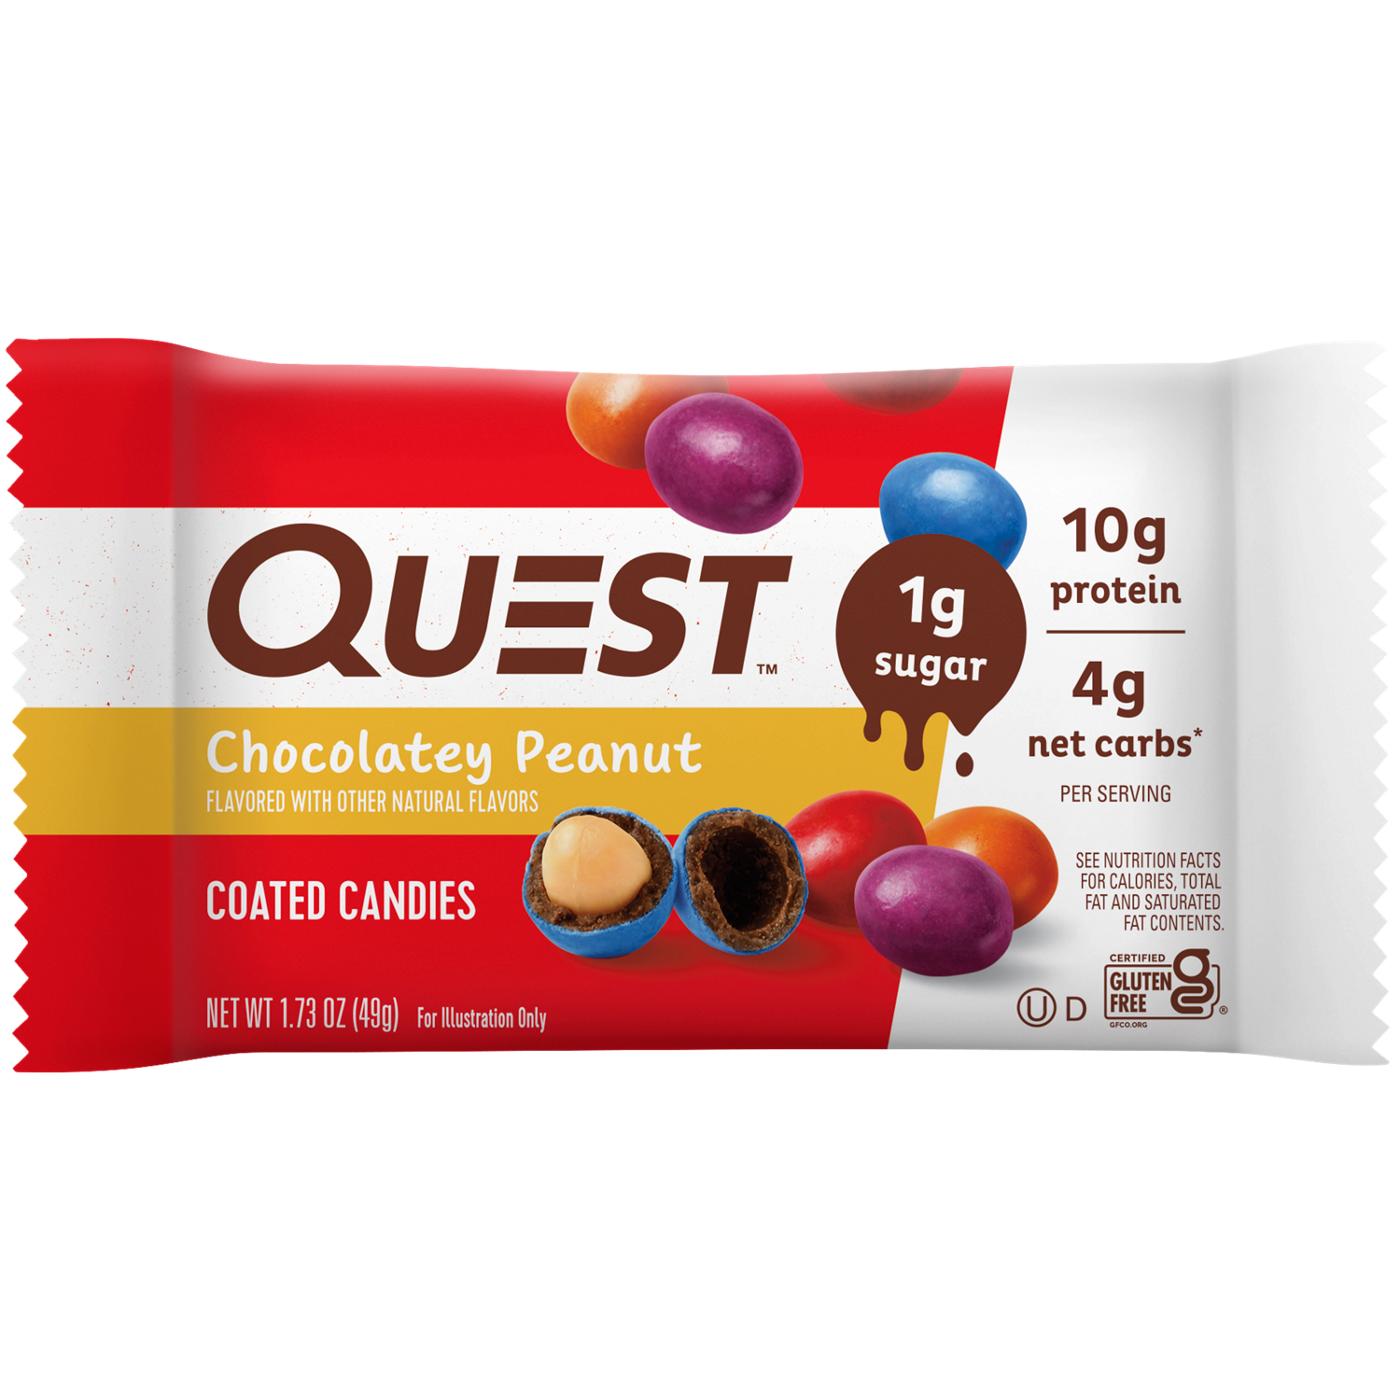 Quest Chocolatey Peanut Coated Candies; image 1 of 2